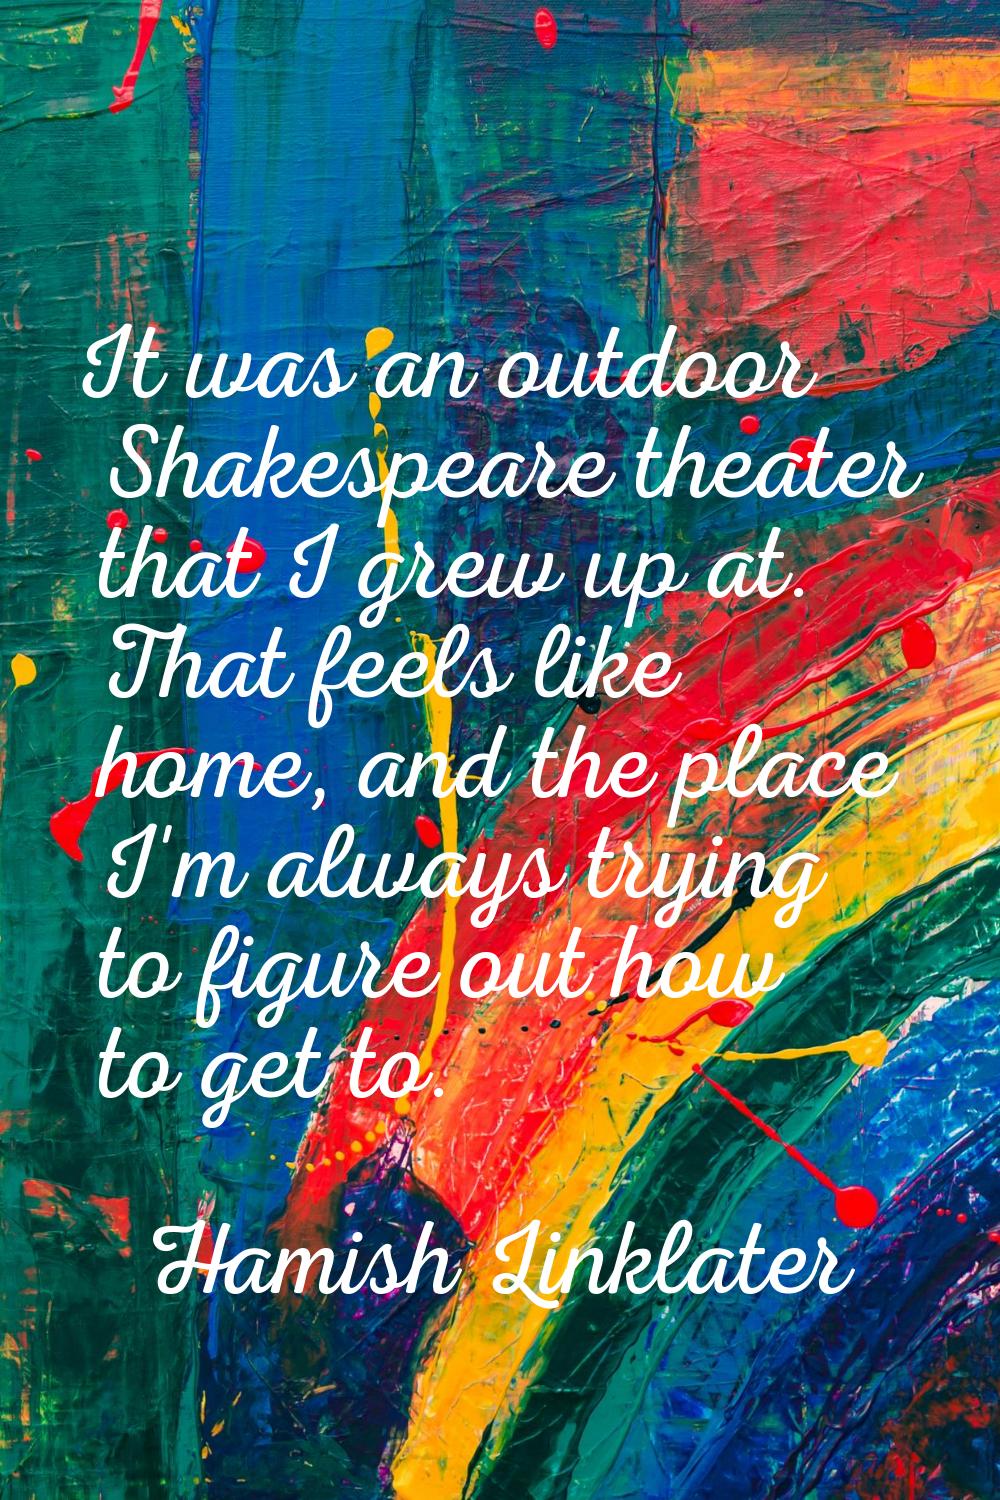 It was an outdoor Shakespeare theater that I grew up at. That feels like home, and the place I'm al